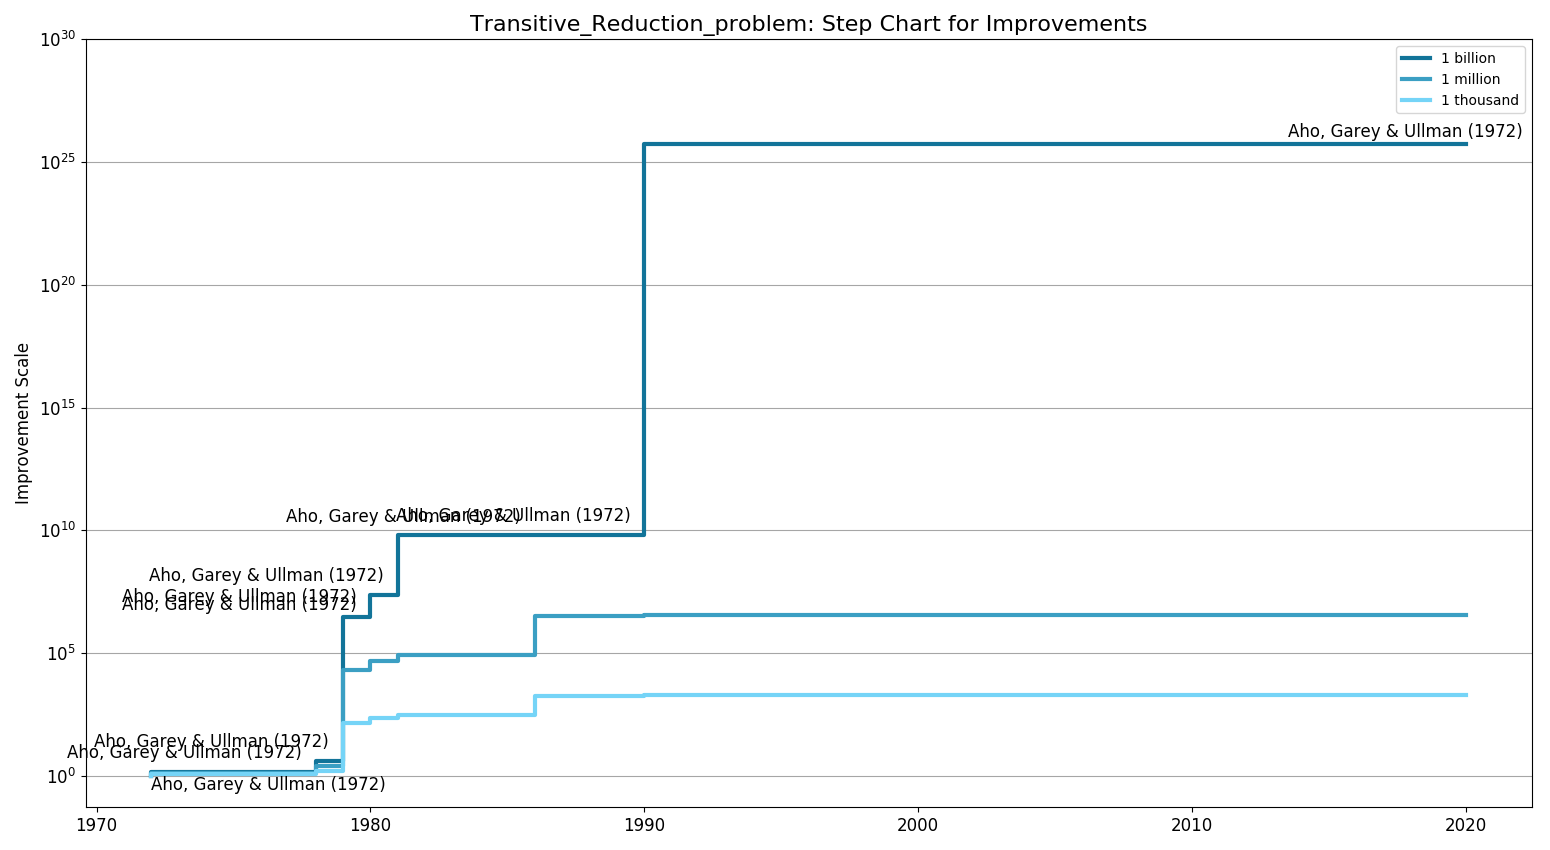 File:Transitive Reduction problemStepChart.png